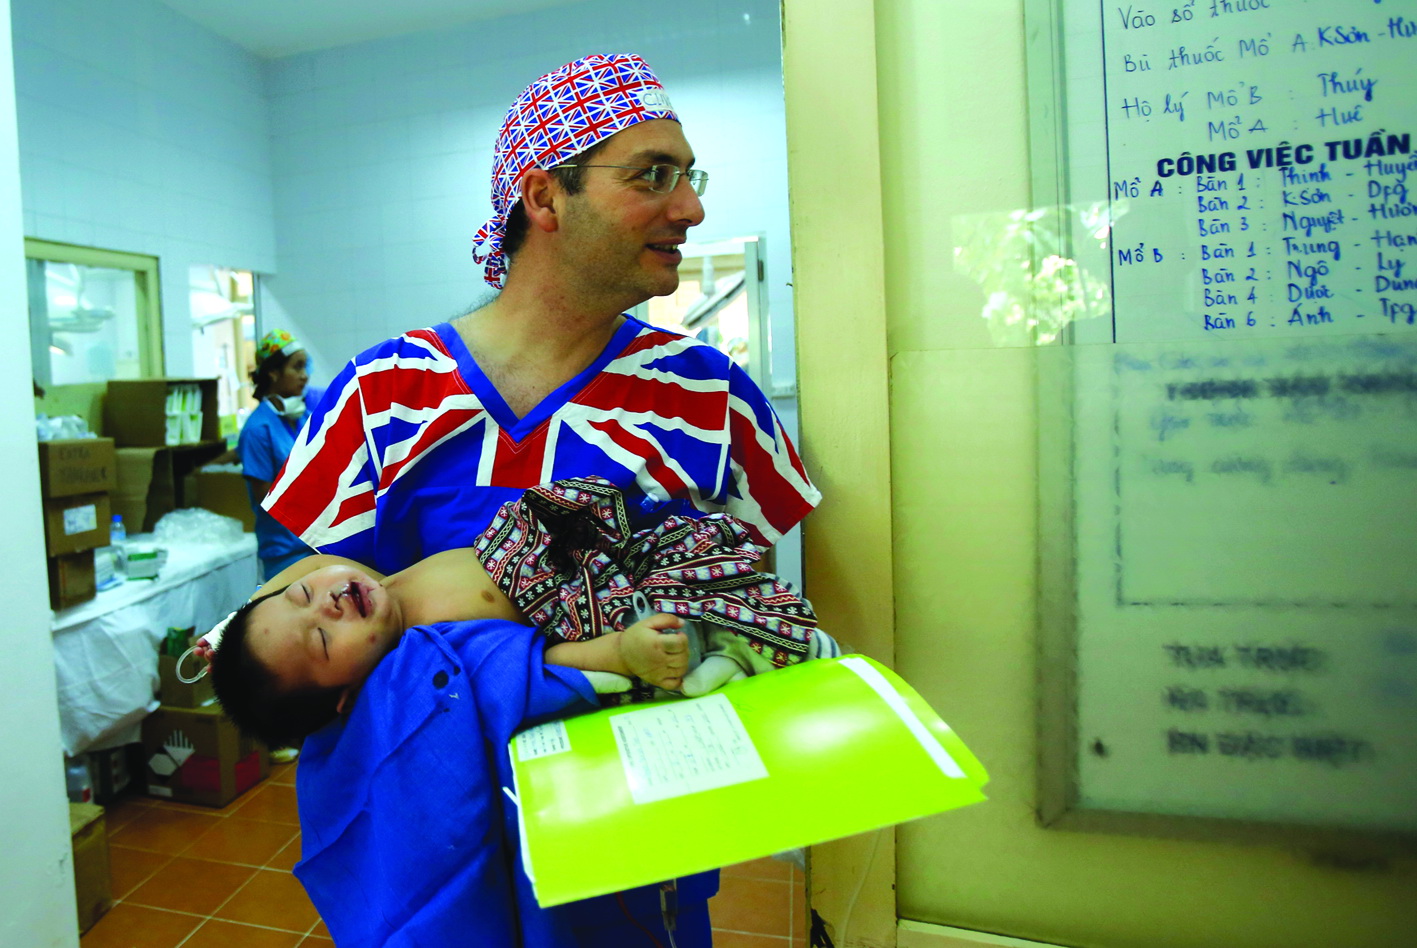 Doctor Clive, from the U.K., is seen taking a kid to the recovery room after a successful operation.